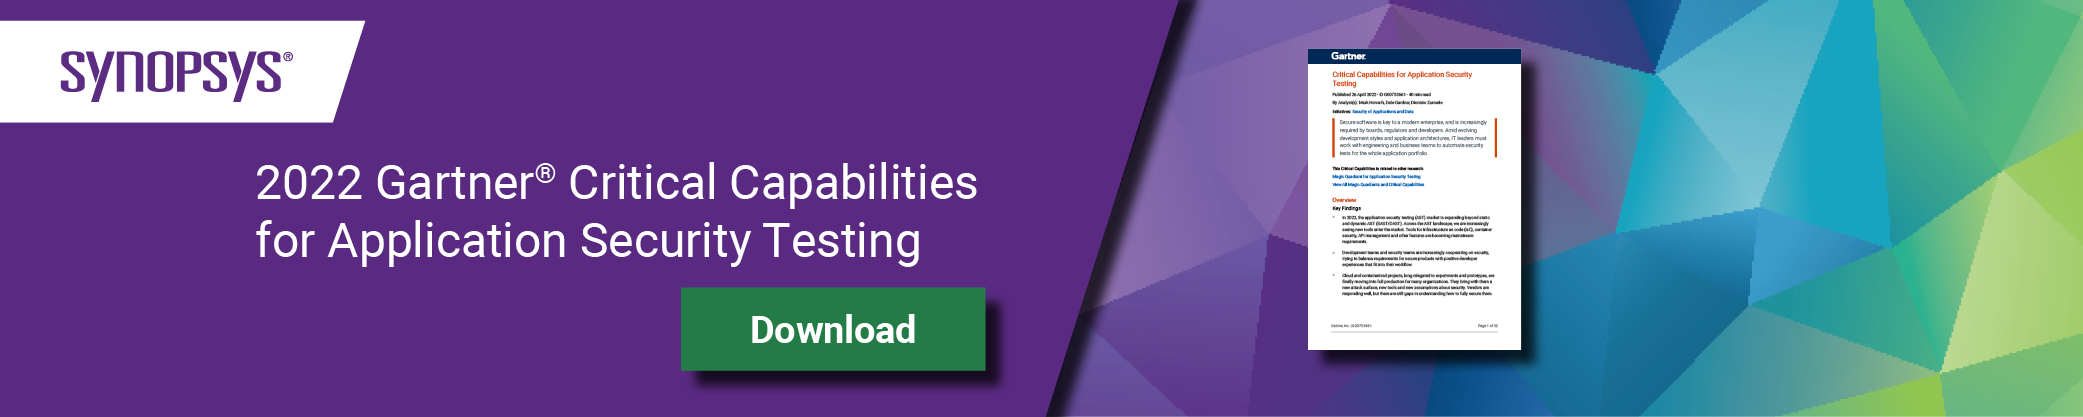 Download the 2022 Gartner Critical Capabilities for Application Security Testing Report |  Synopsis